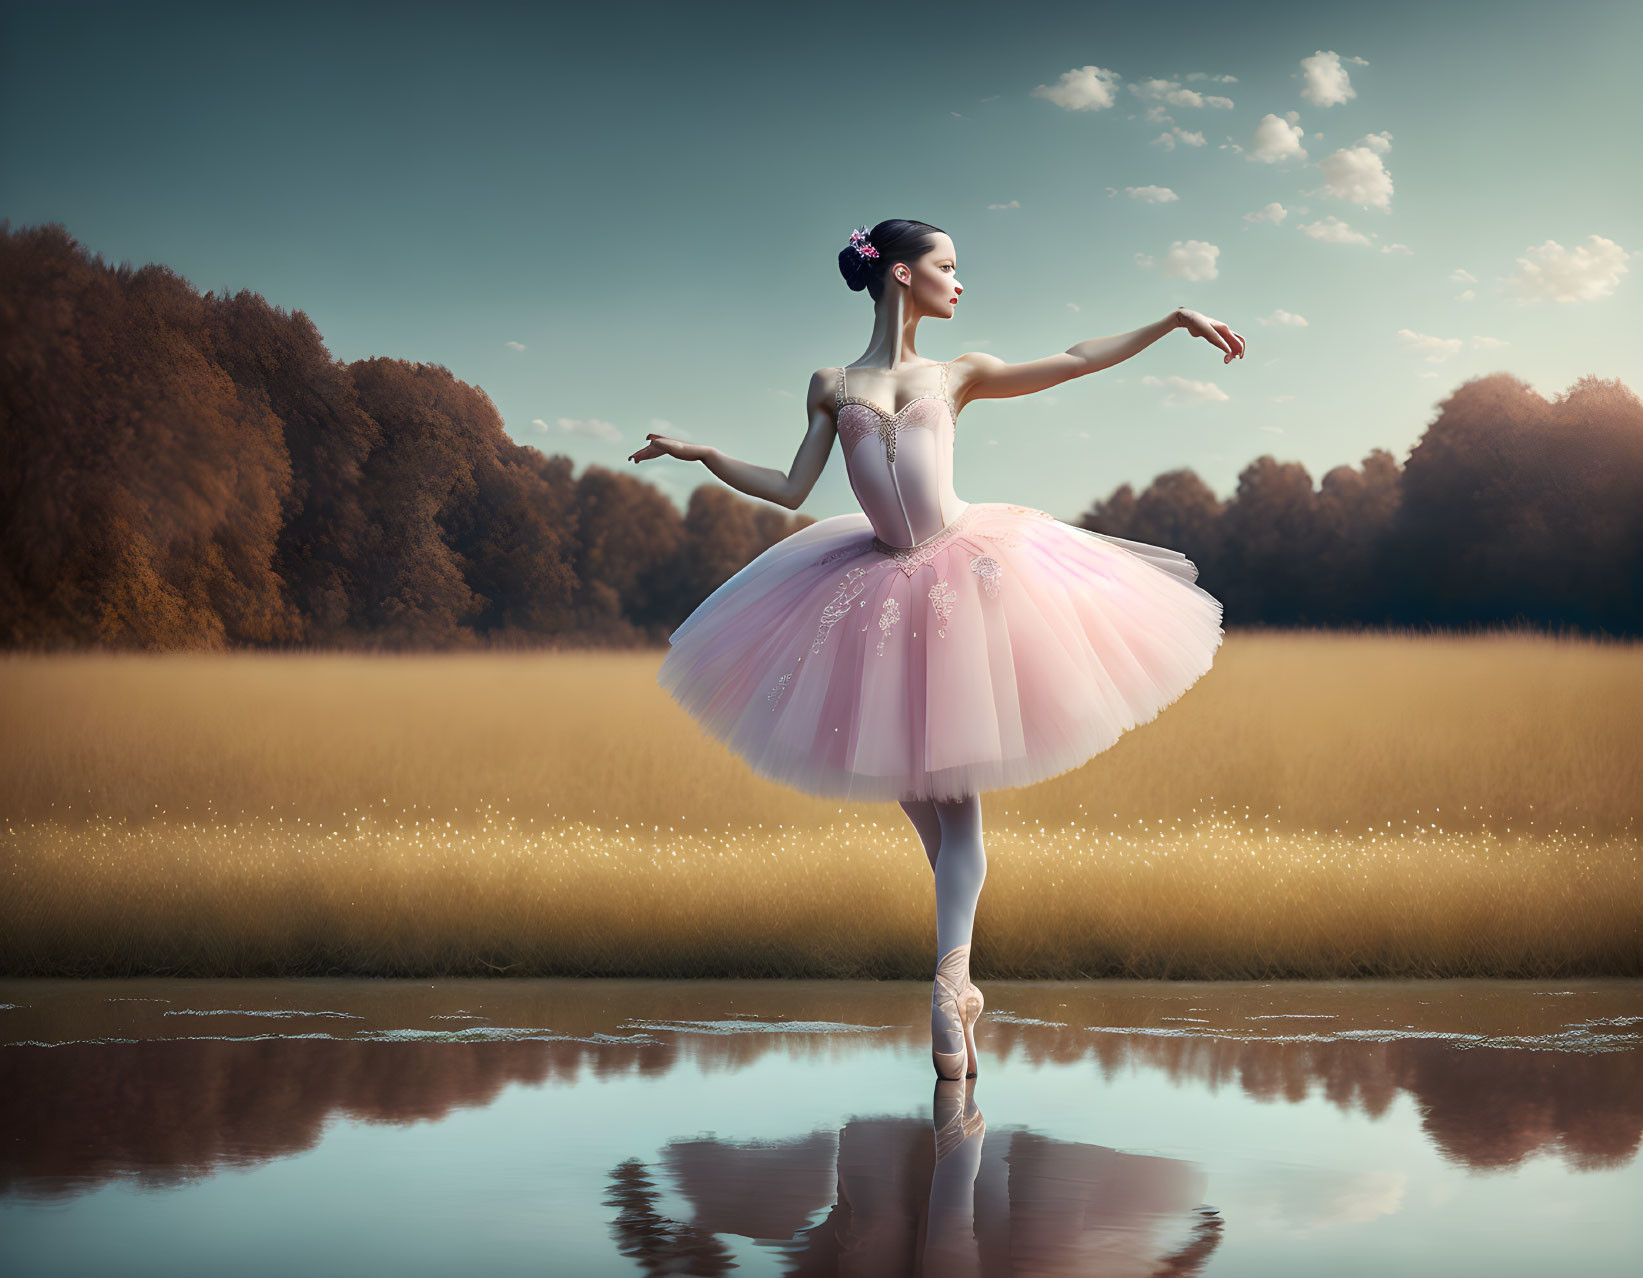 Ballerina in pink tutu poses by reflective water in golden field